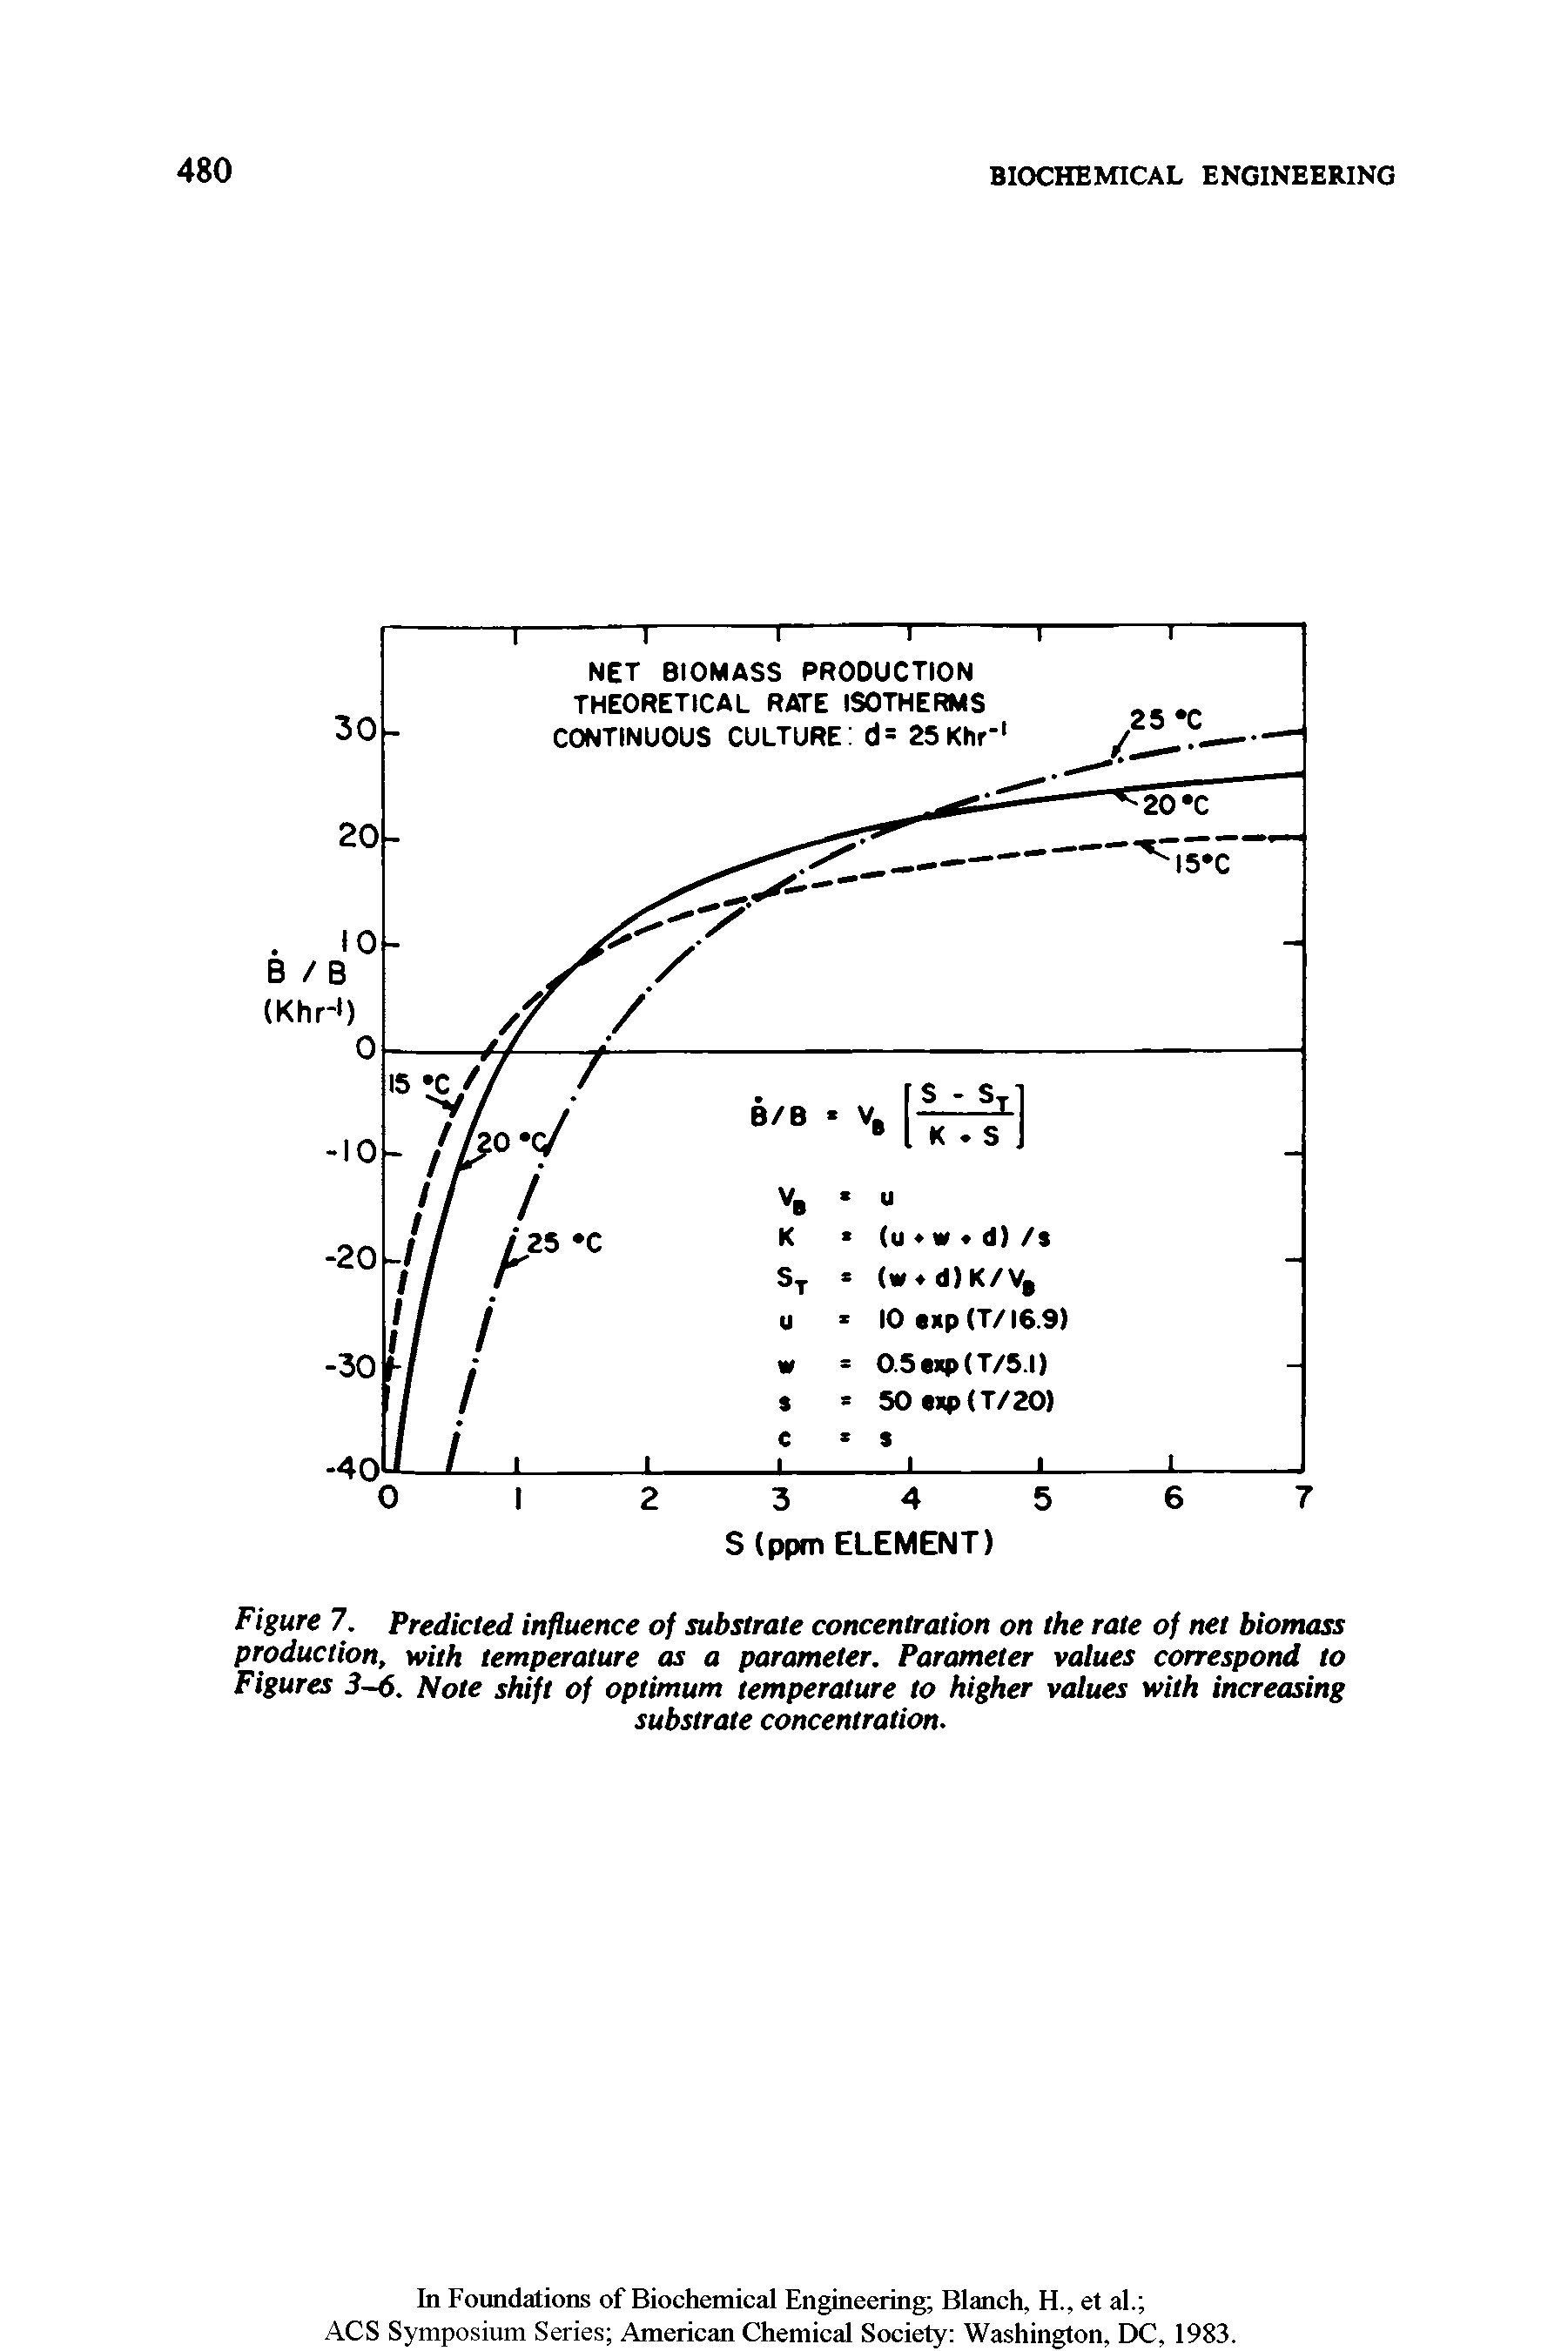 Figure 7. Predicted influence of substrate concentration on the rate of net biomass production, with temperature as a parameter. Parameter values correspond to Figures 3-6. Note shift of optimum temperature to higher values with increasing...